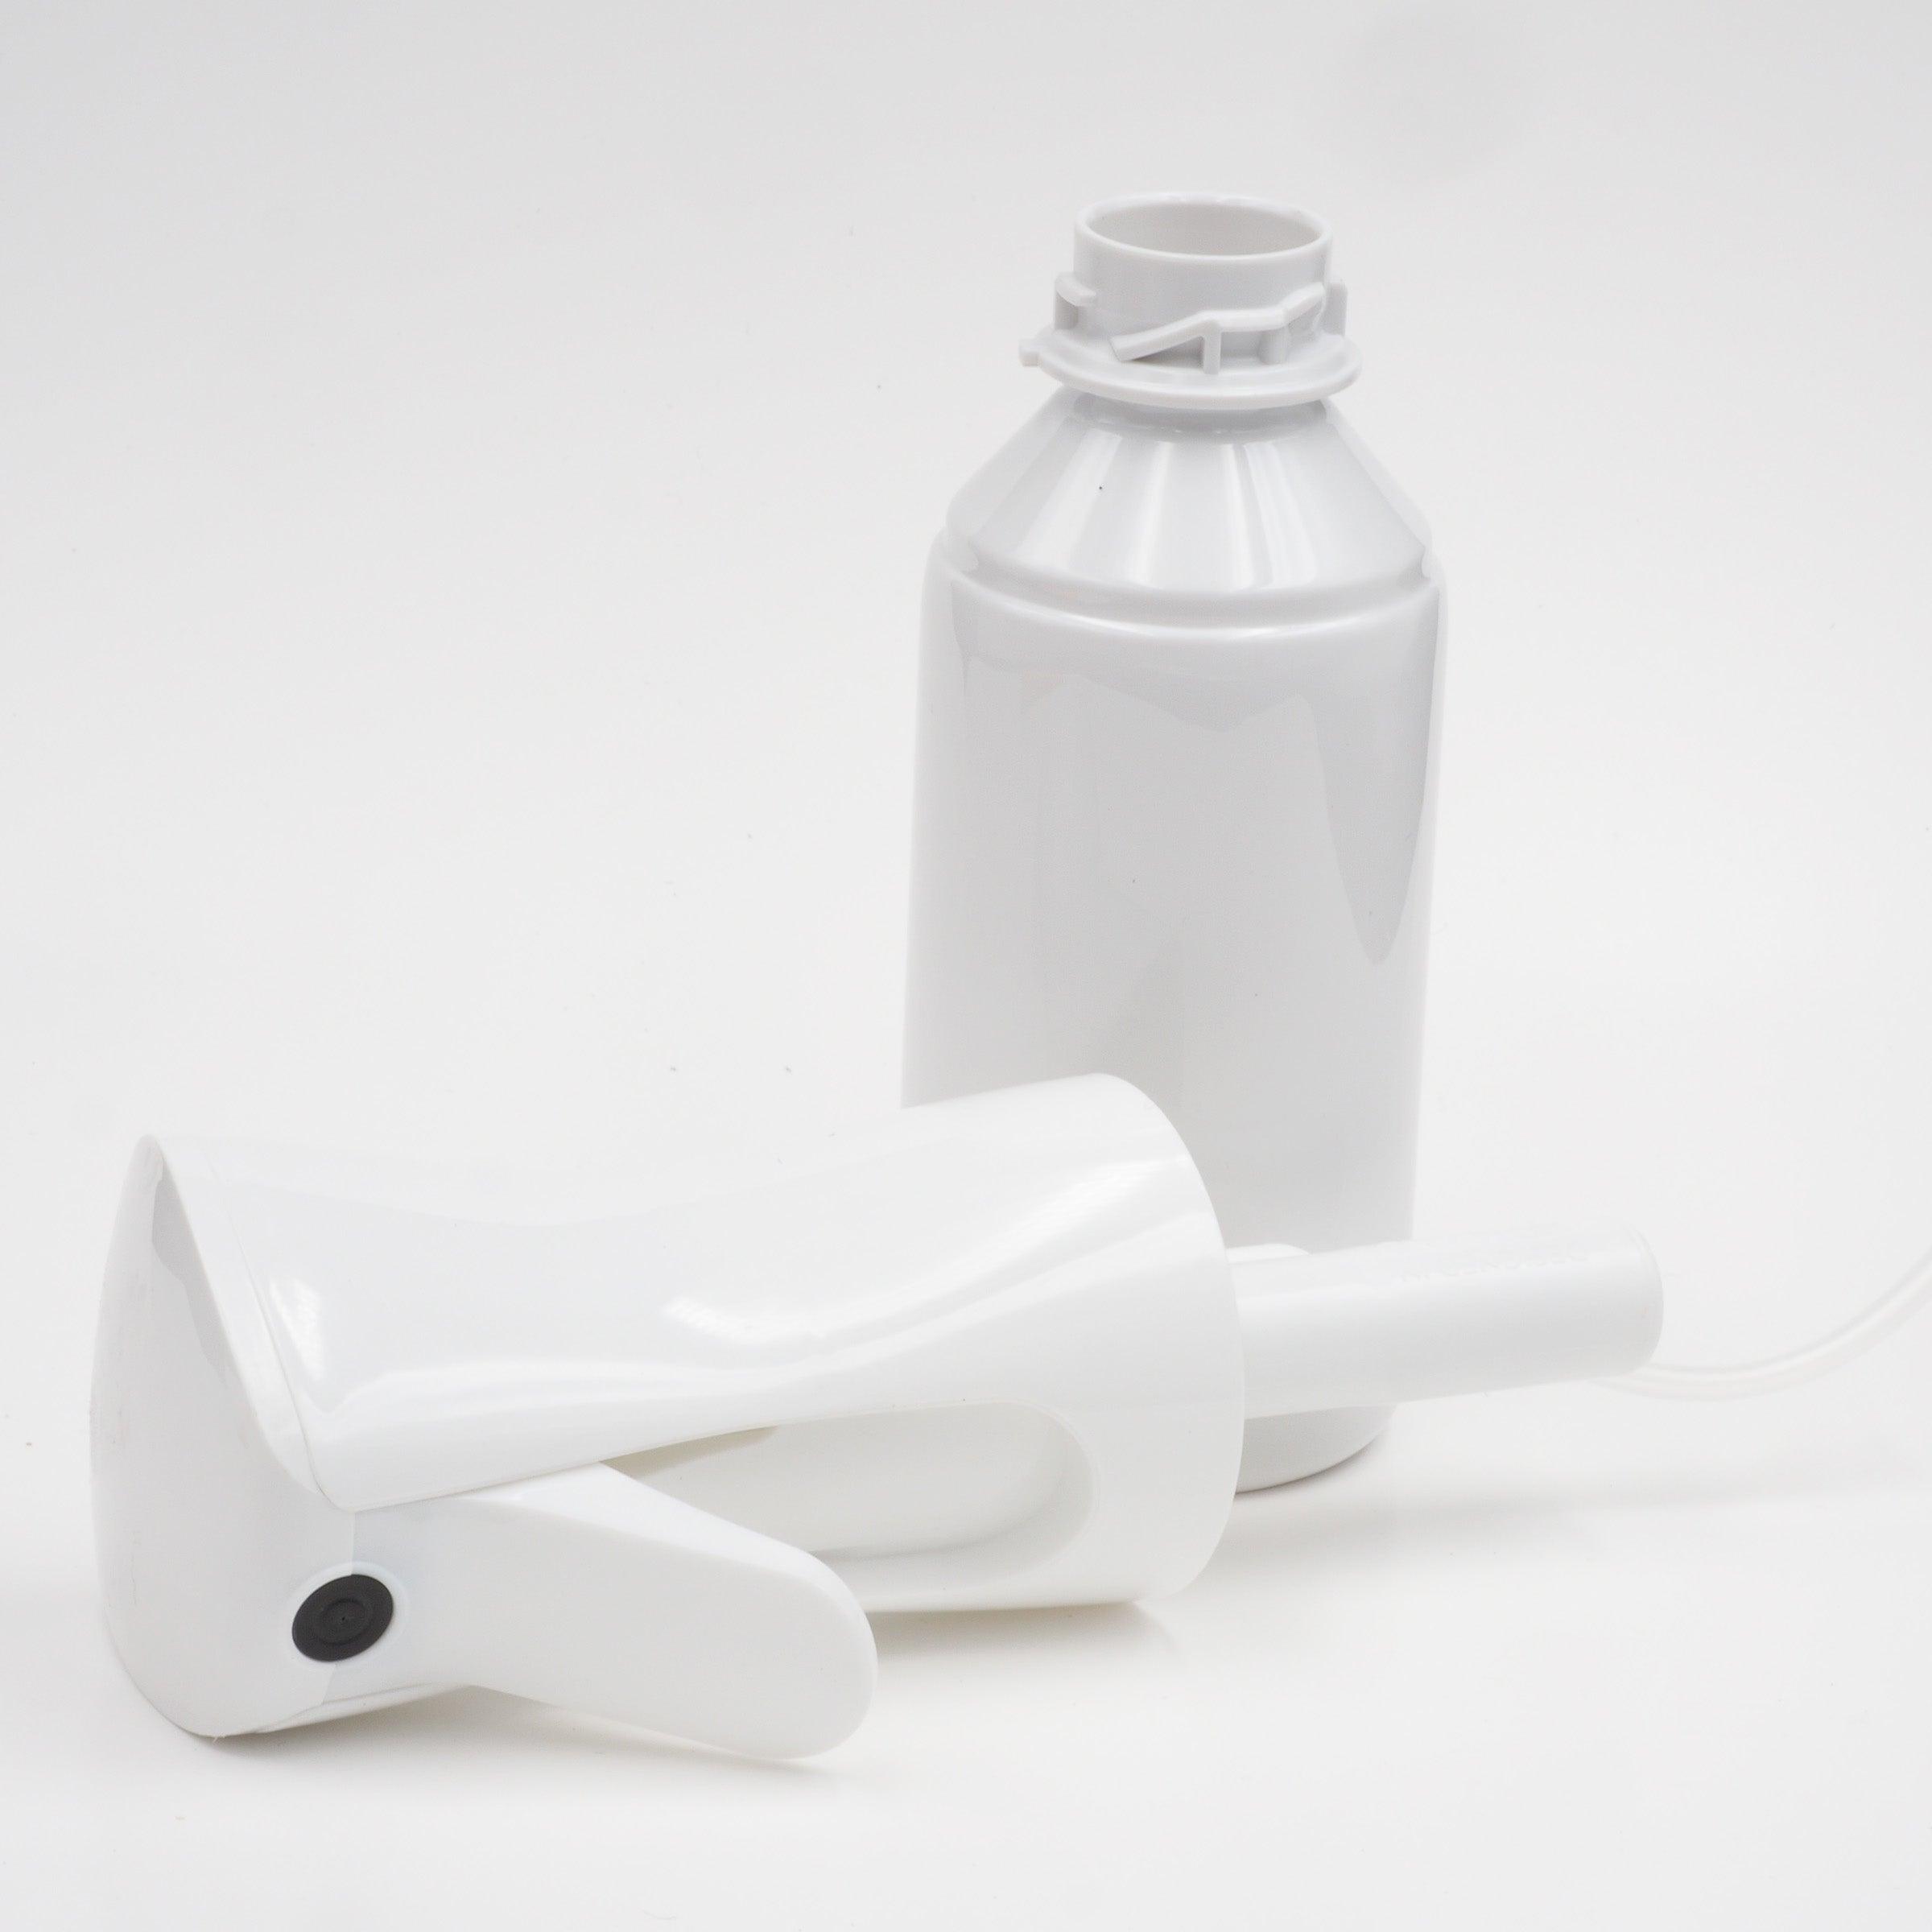 High Pressure Continuous Spray Bottle from Dzeani